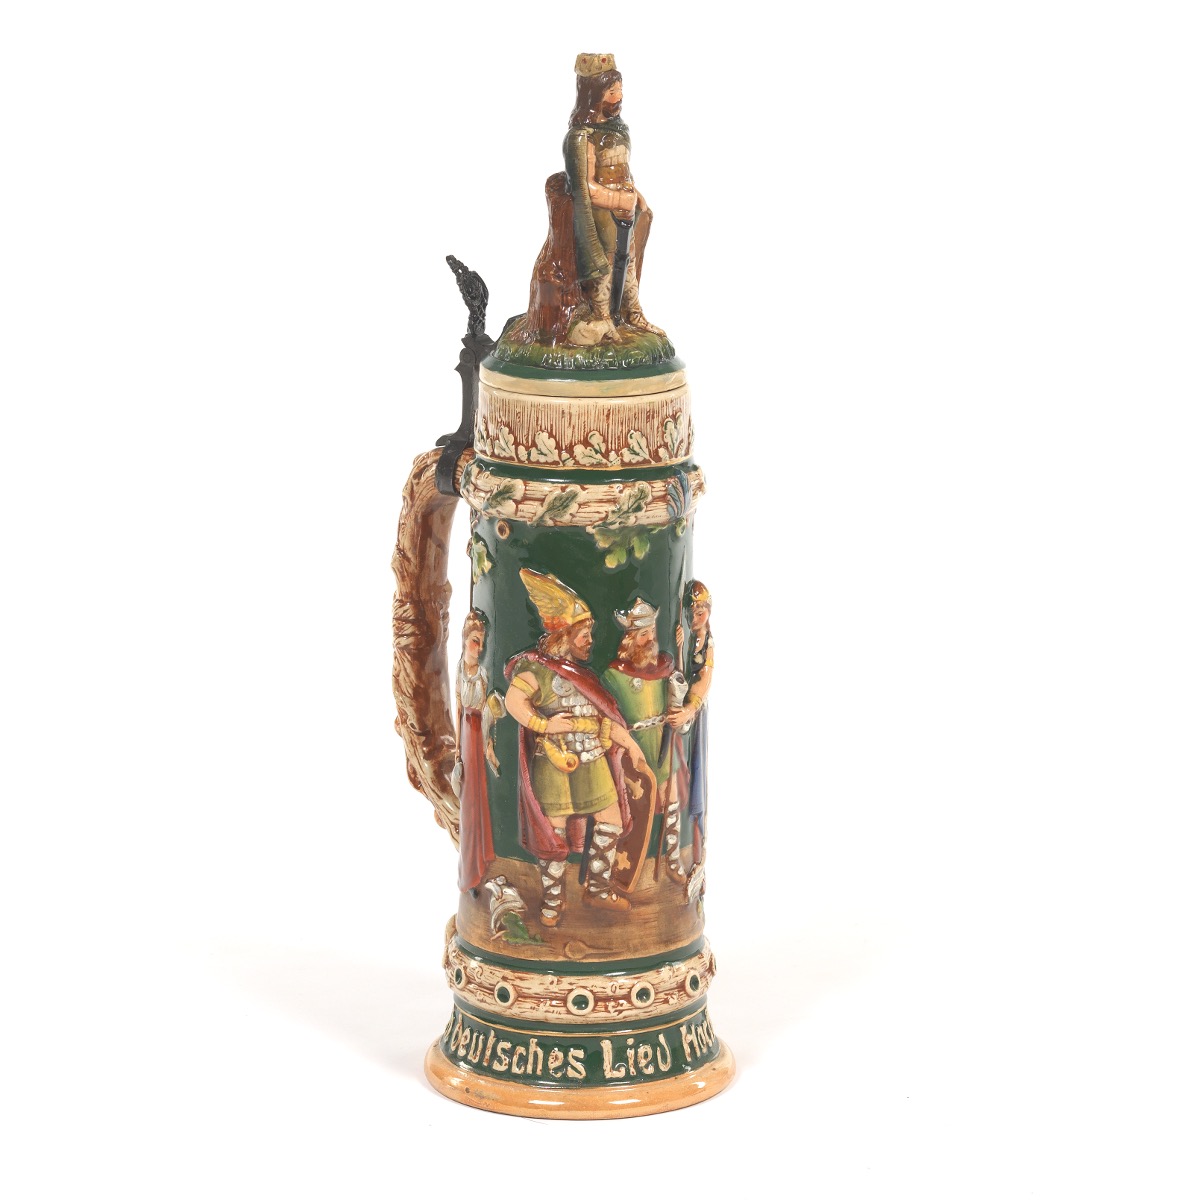 German Ceramic Stein "The Ring of the Nibelung"